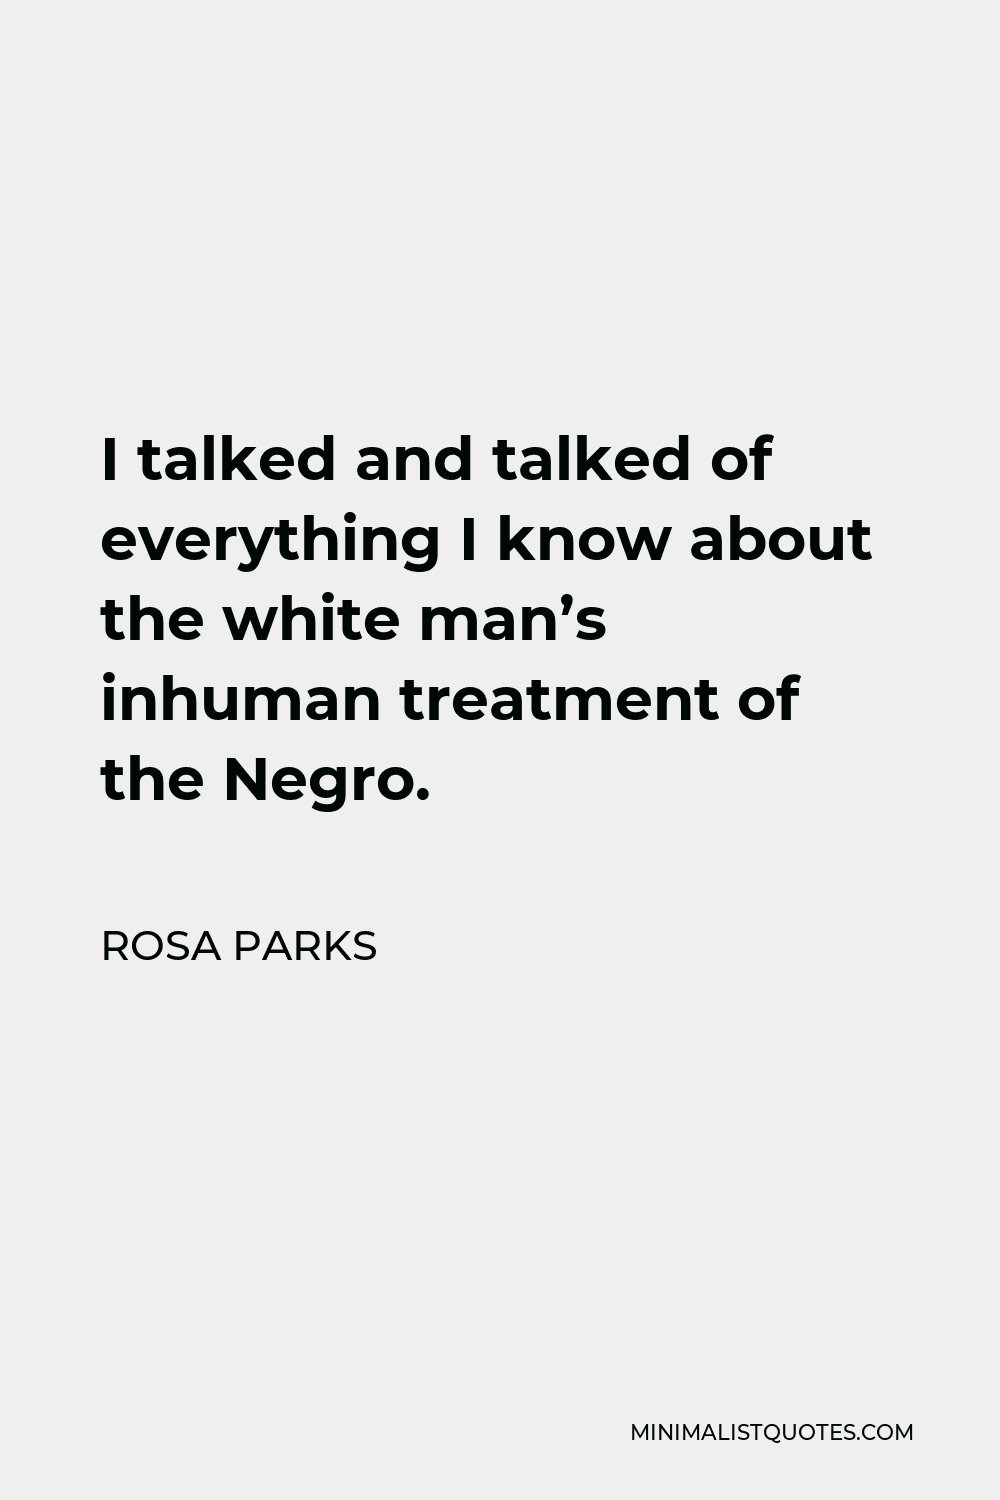 Rosa Parks Quote - I talked and talked of everything I know about the white man’s inhuman treatment of the Negro.